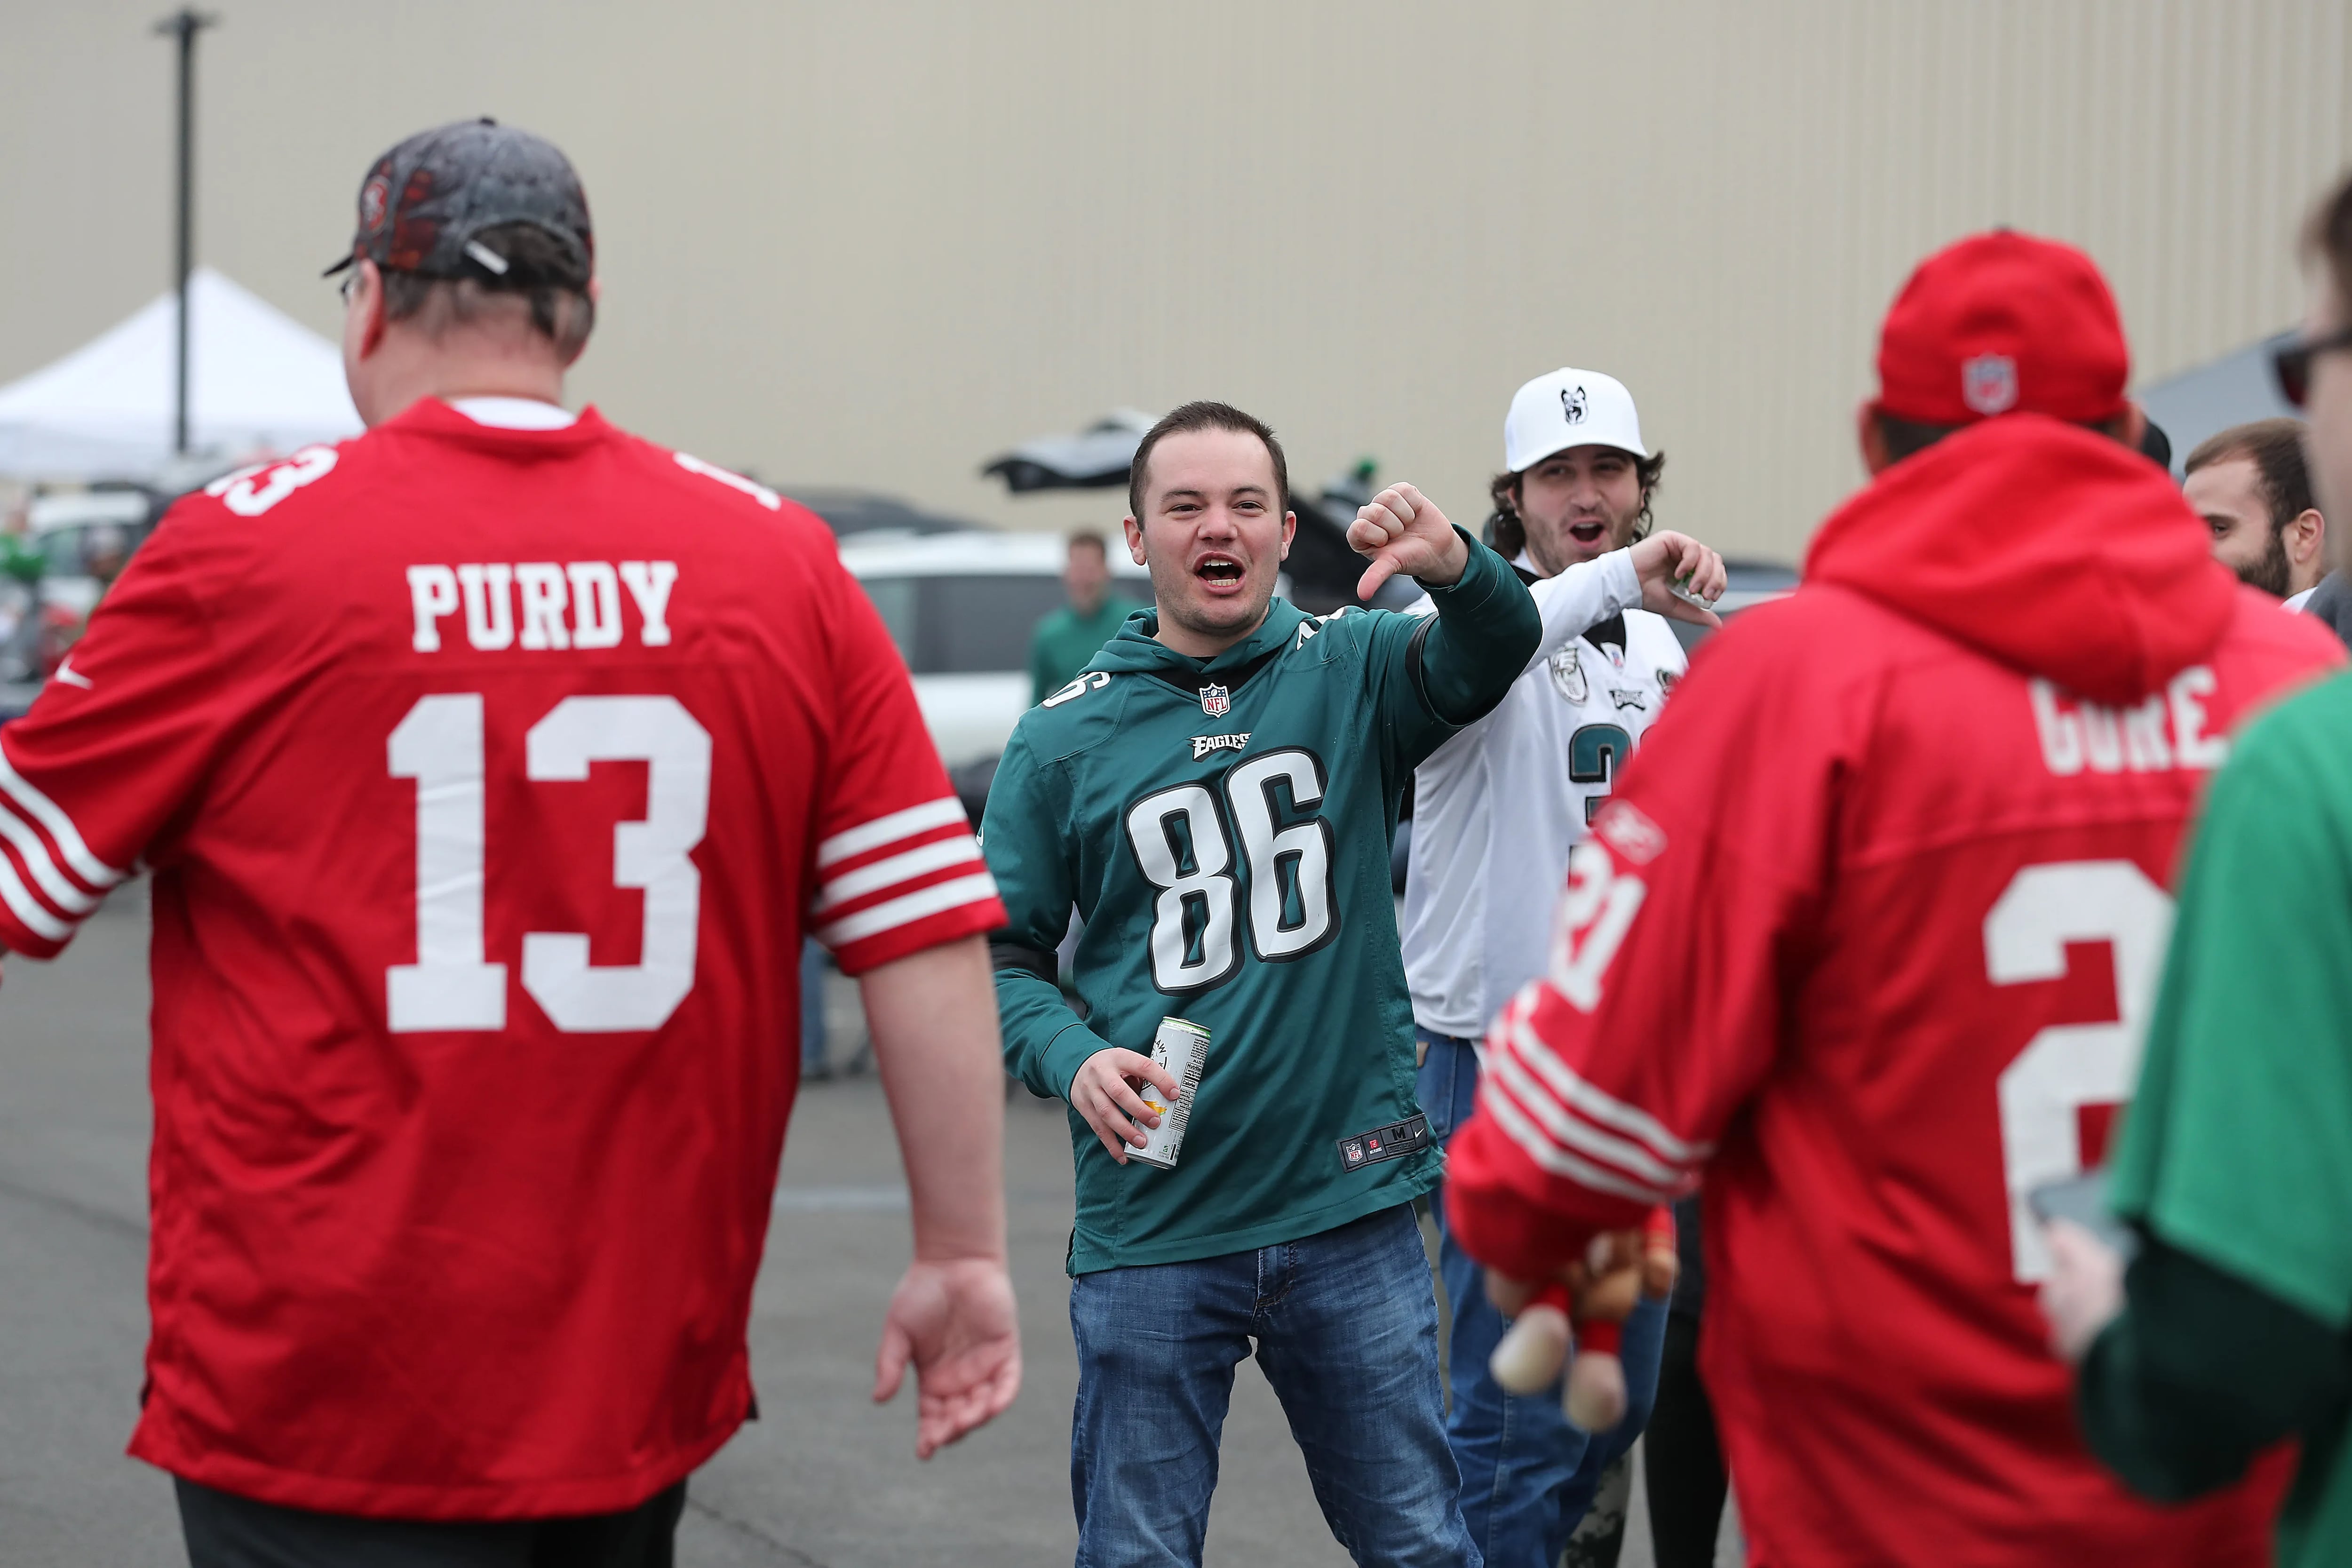 Eagles fans boo 49ers fans ahead of last season's NFC Championship game at the Linc. 